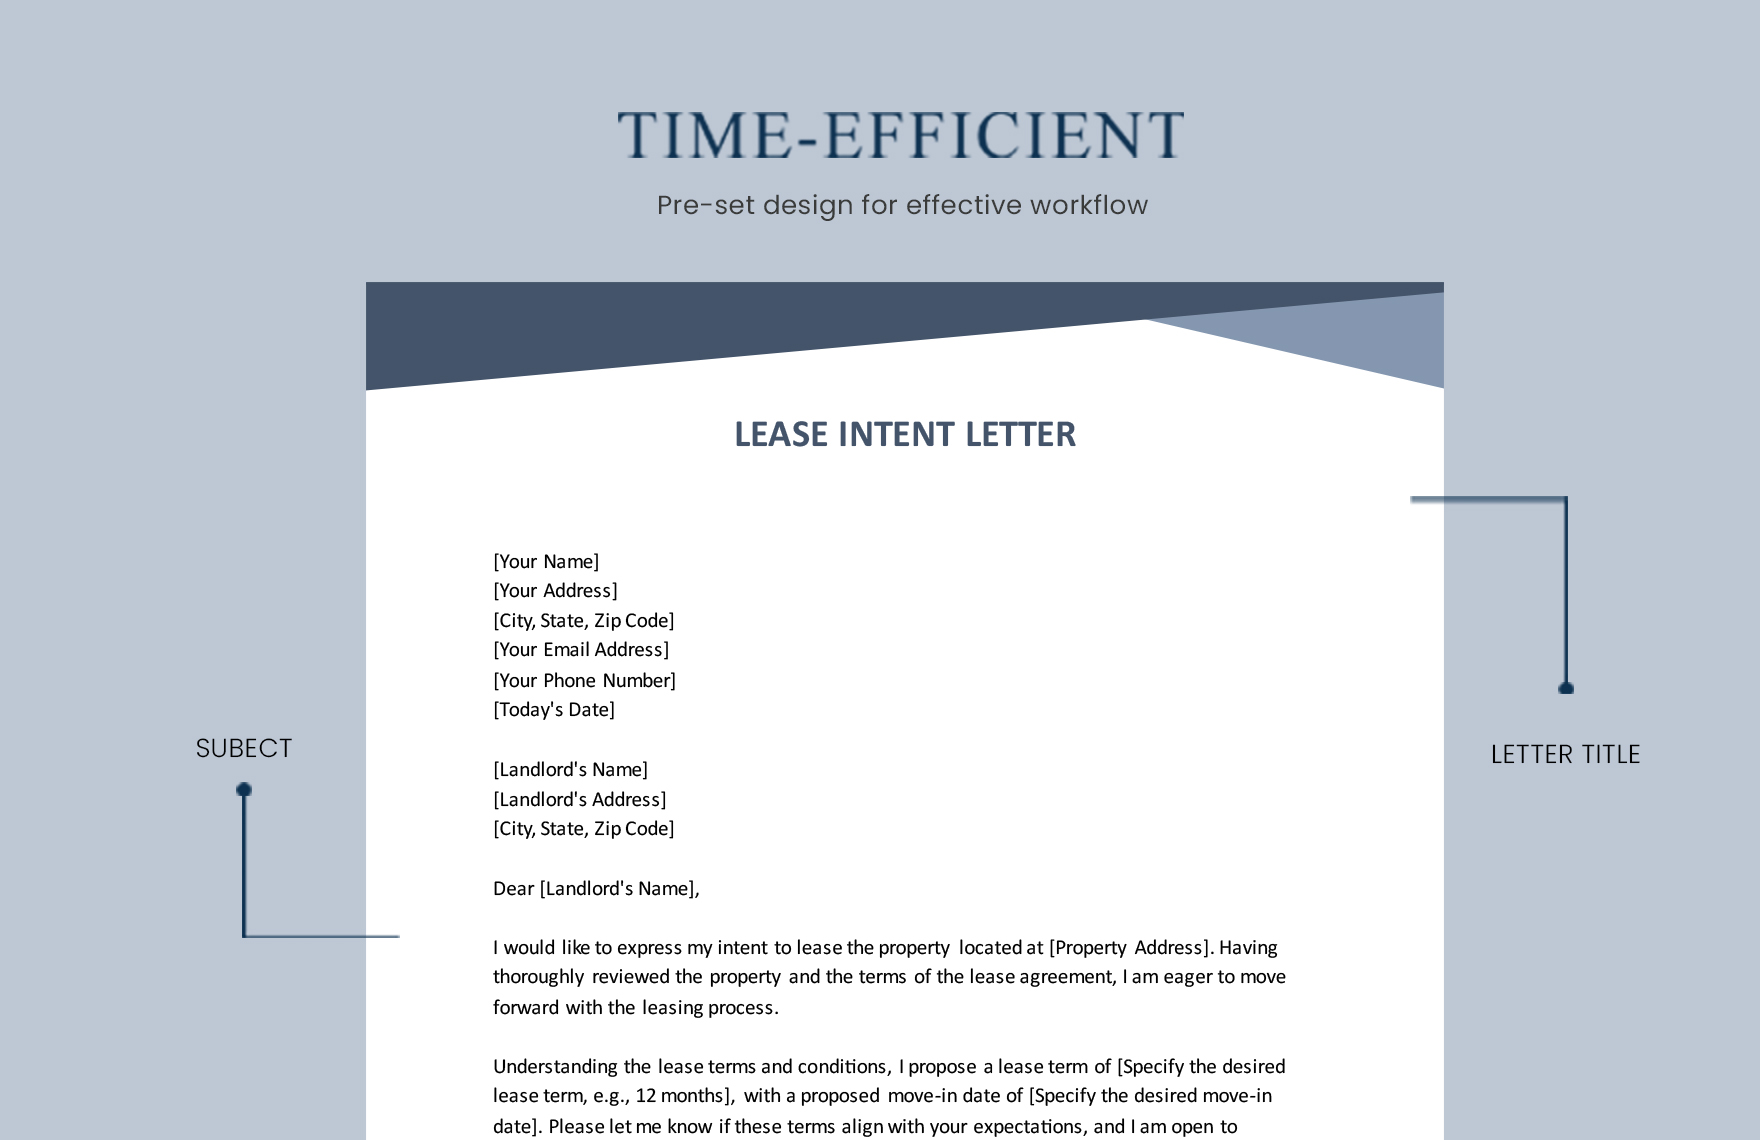 Lease Intent Letter